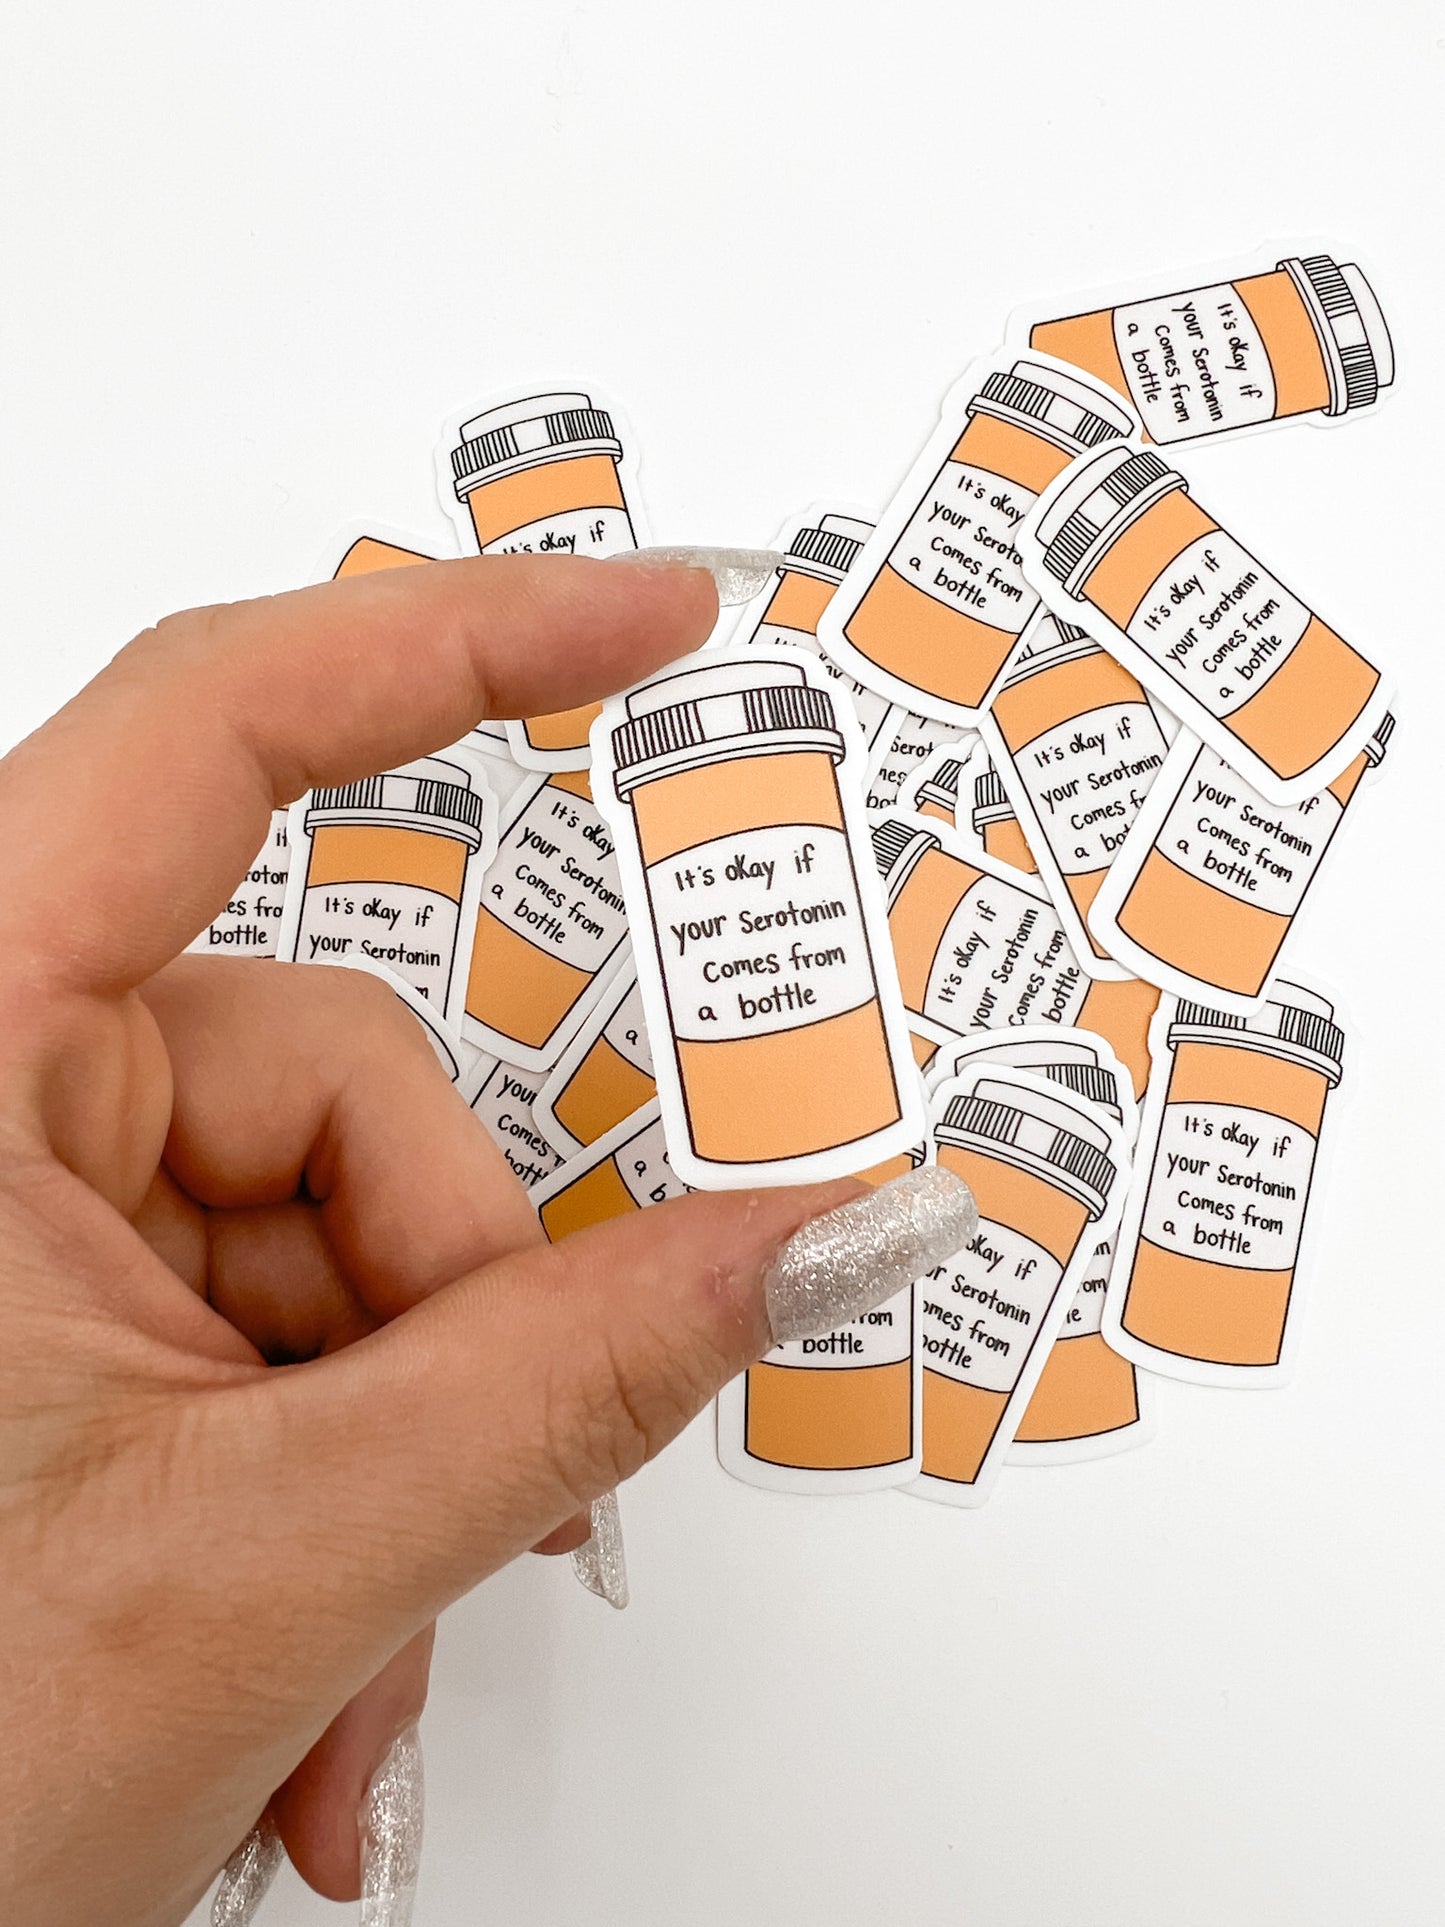 It's Okay If Your Serotonin Comes From A Bottle Sticker